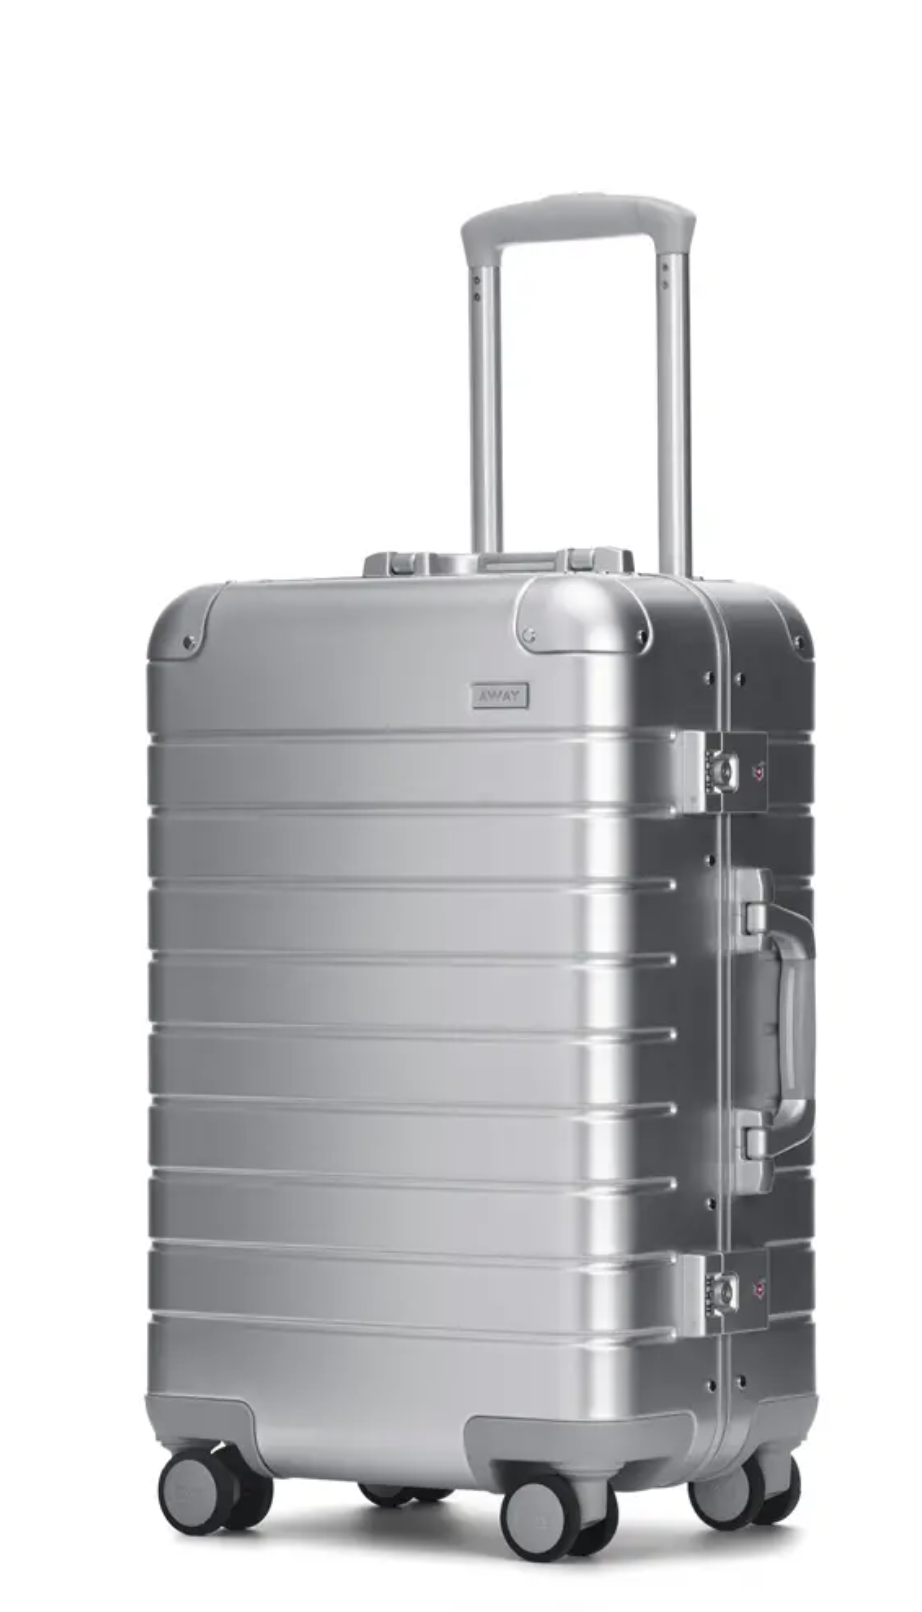 Carry-on luggage Away Suitcase